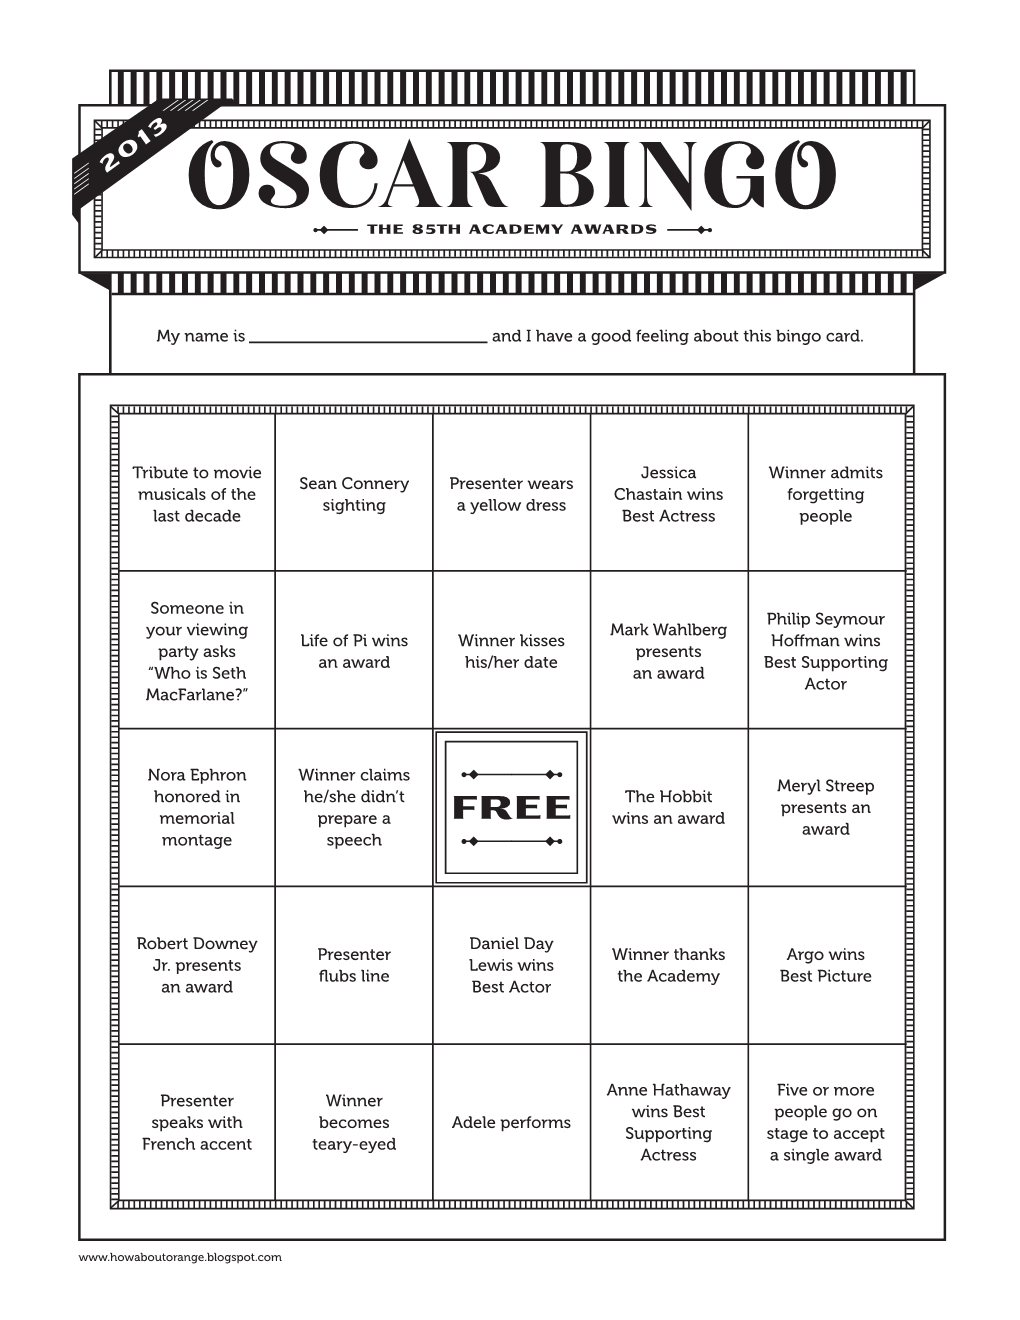 My Name Is and I Have a Good Feeling About This Bingo Card